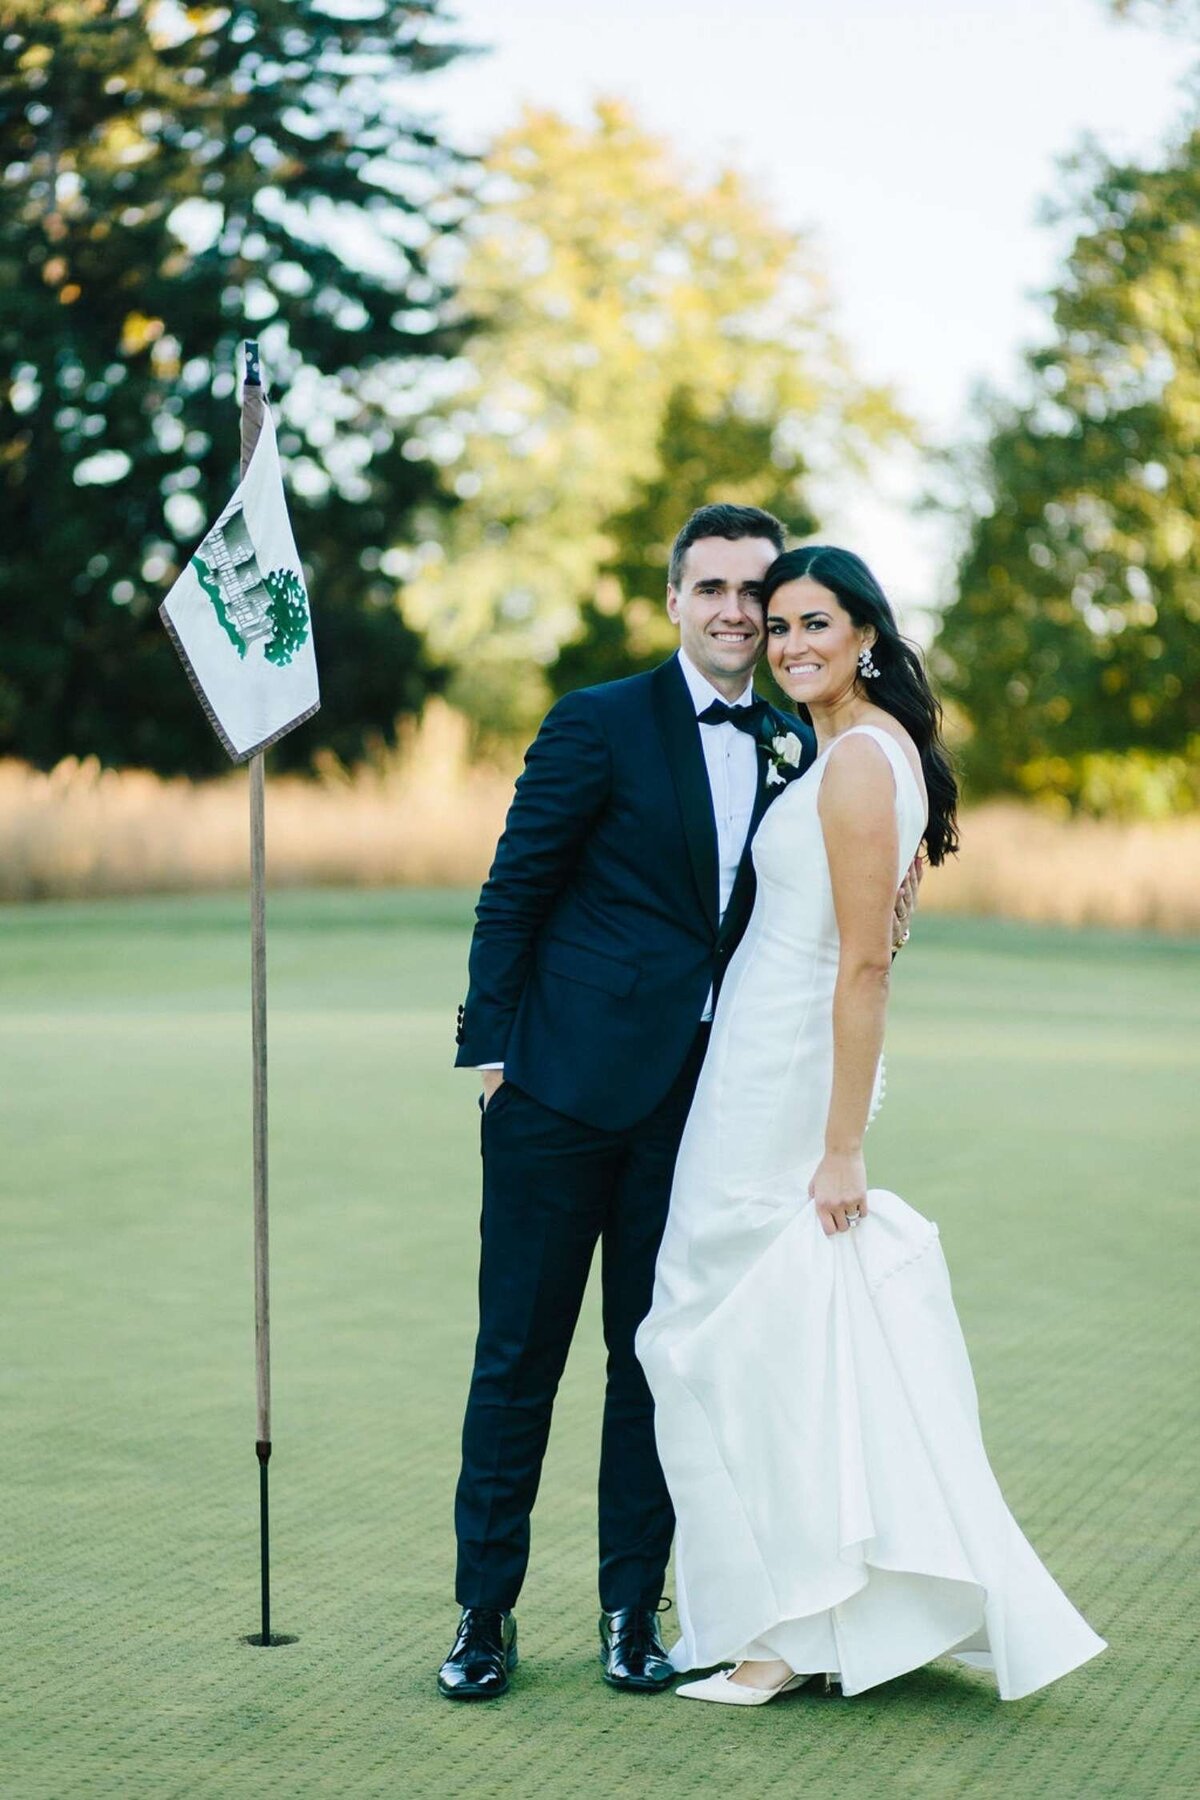 Classic and Elegant Bride and Groom take Portraits  at the 18th Hole on a Luxury Michigan Lakefront Golf Club Wedding.